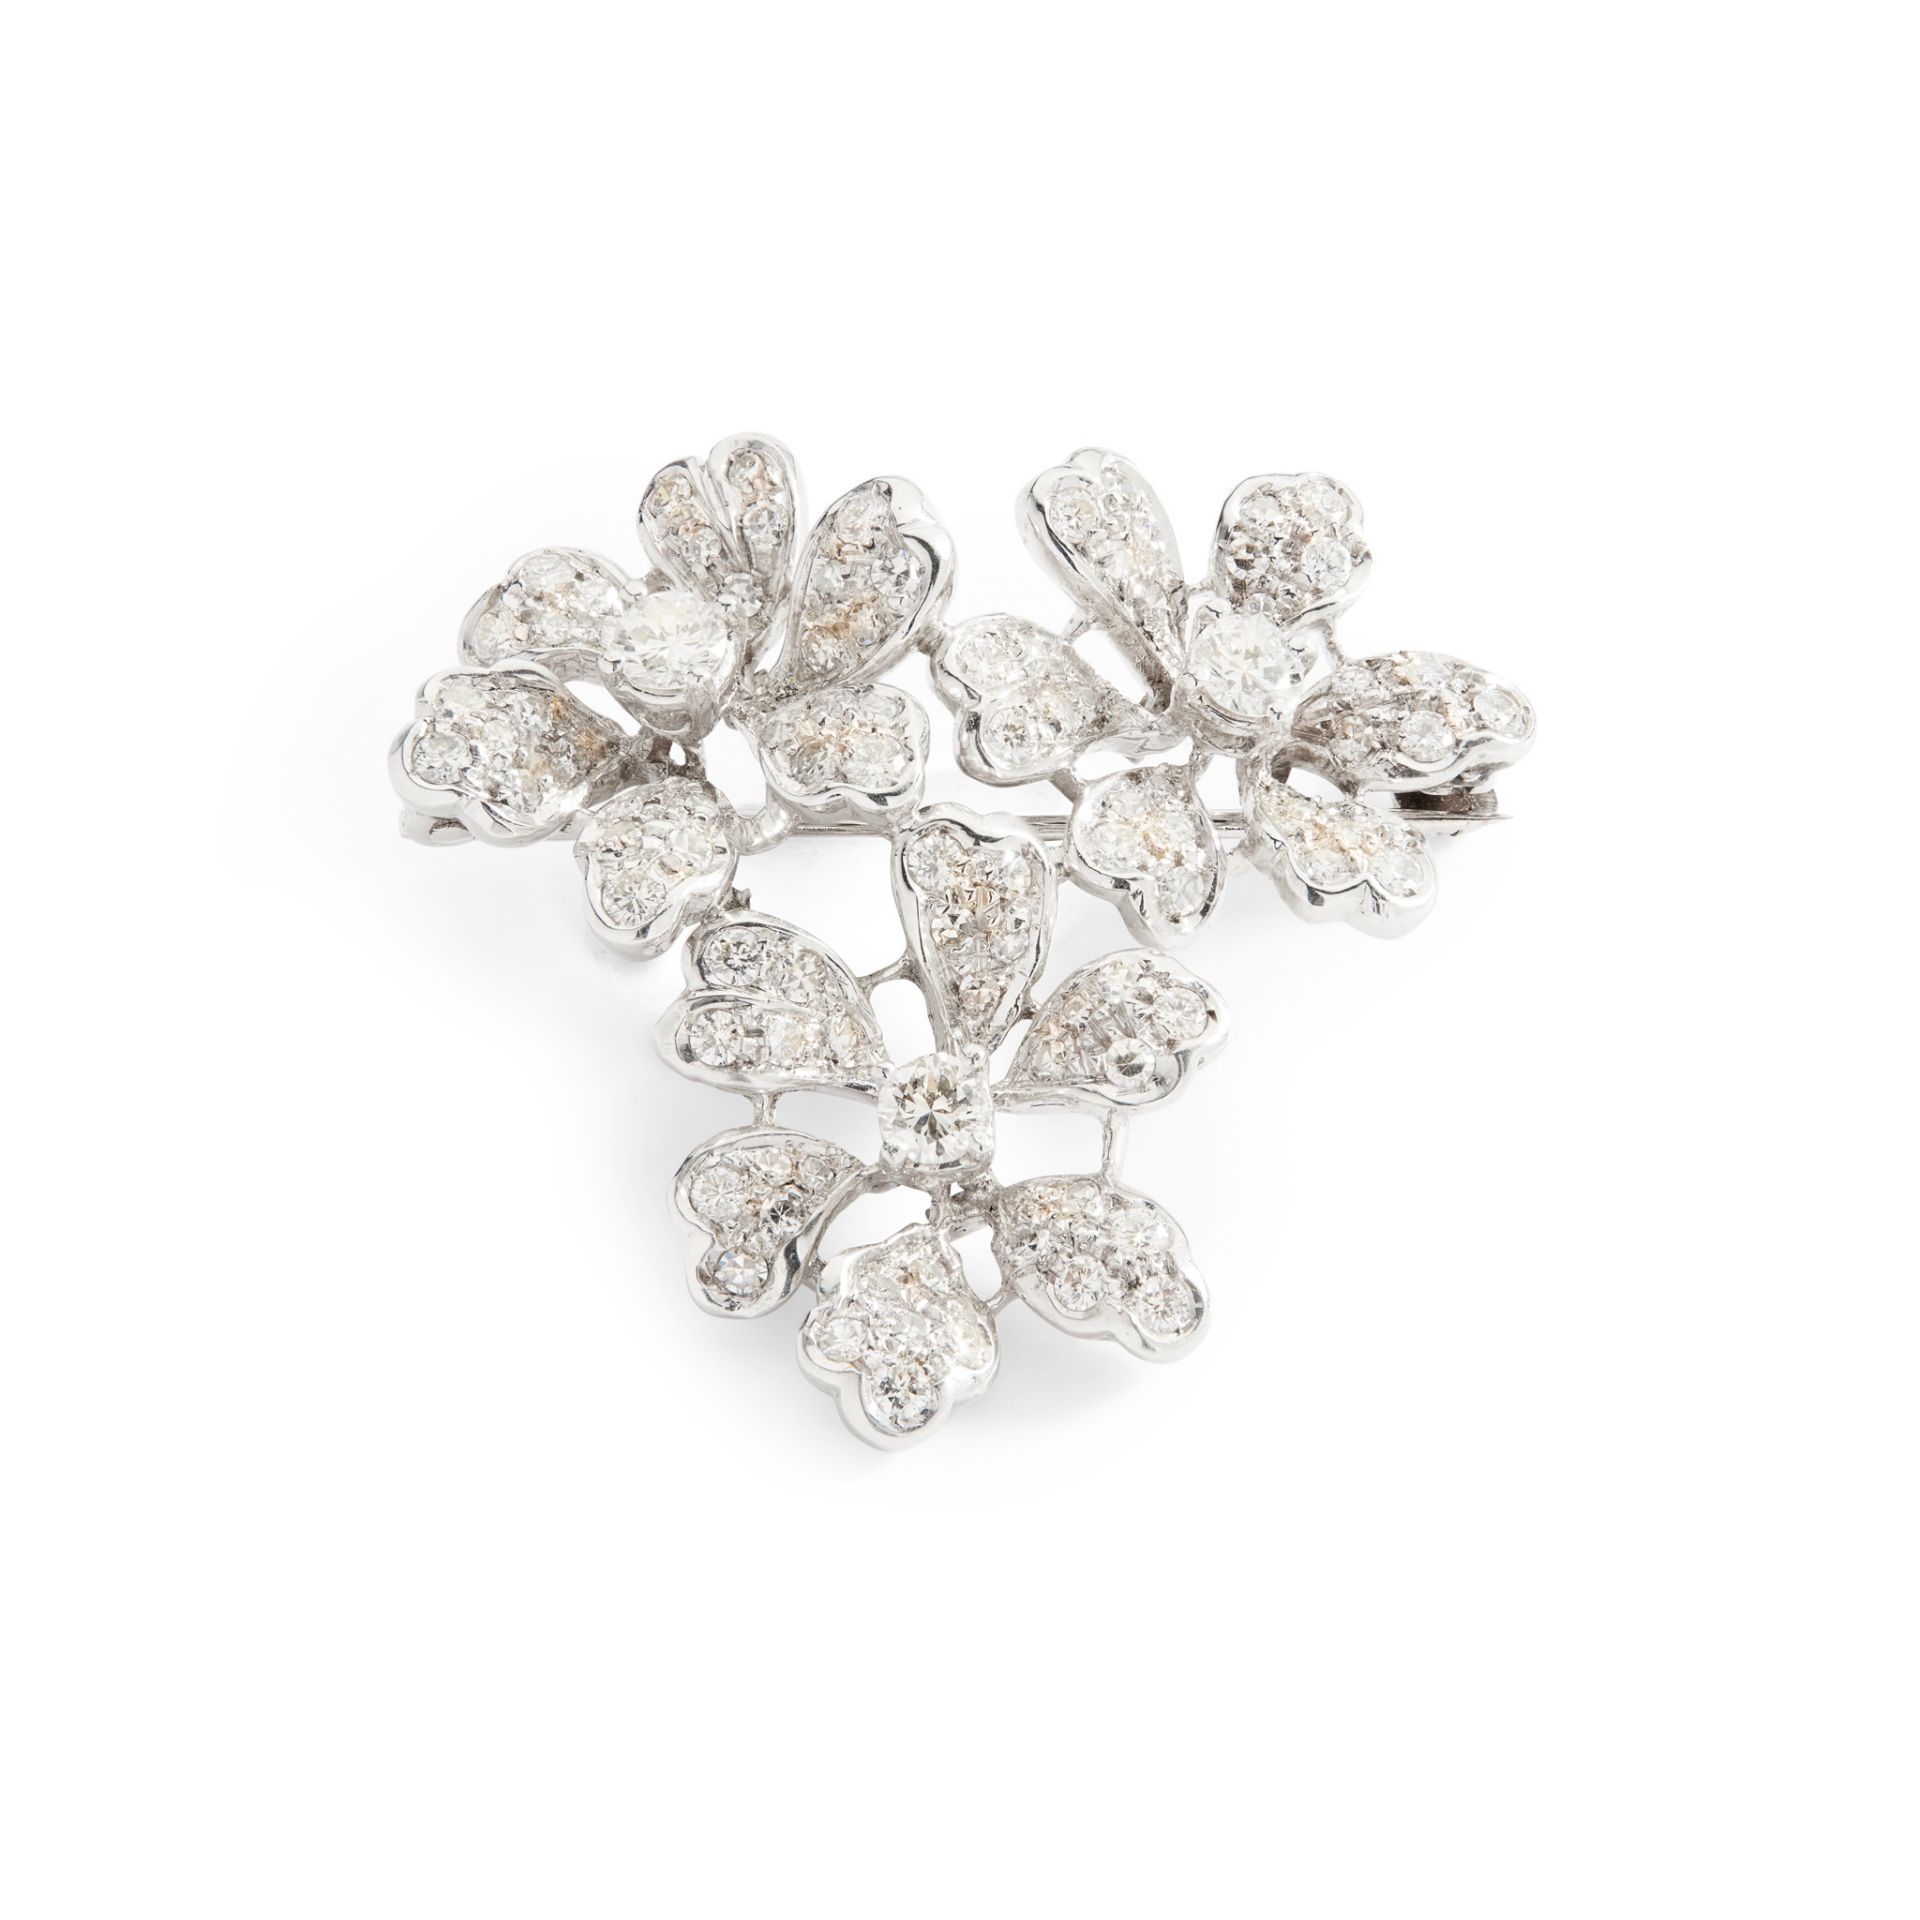 A diamond floral brooch - Image 2 of 2